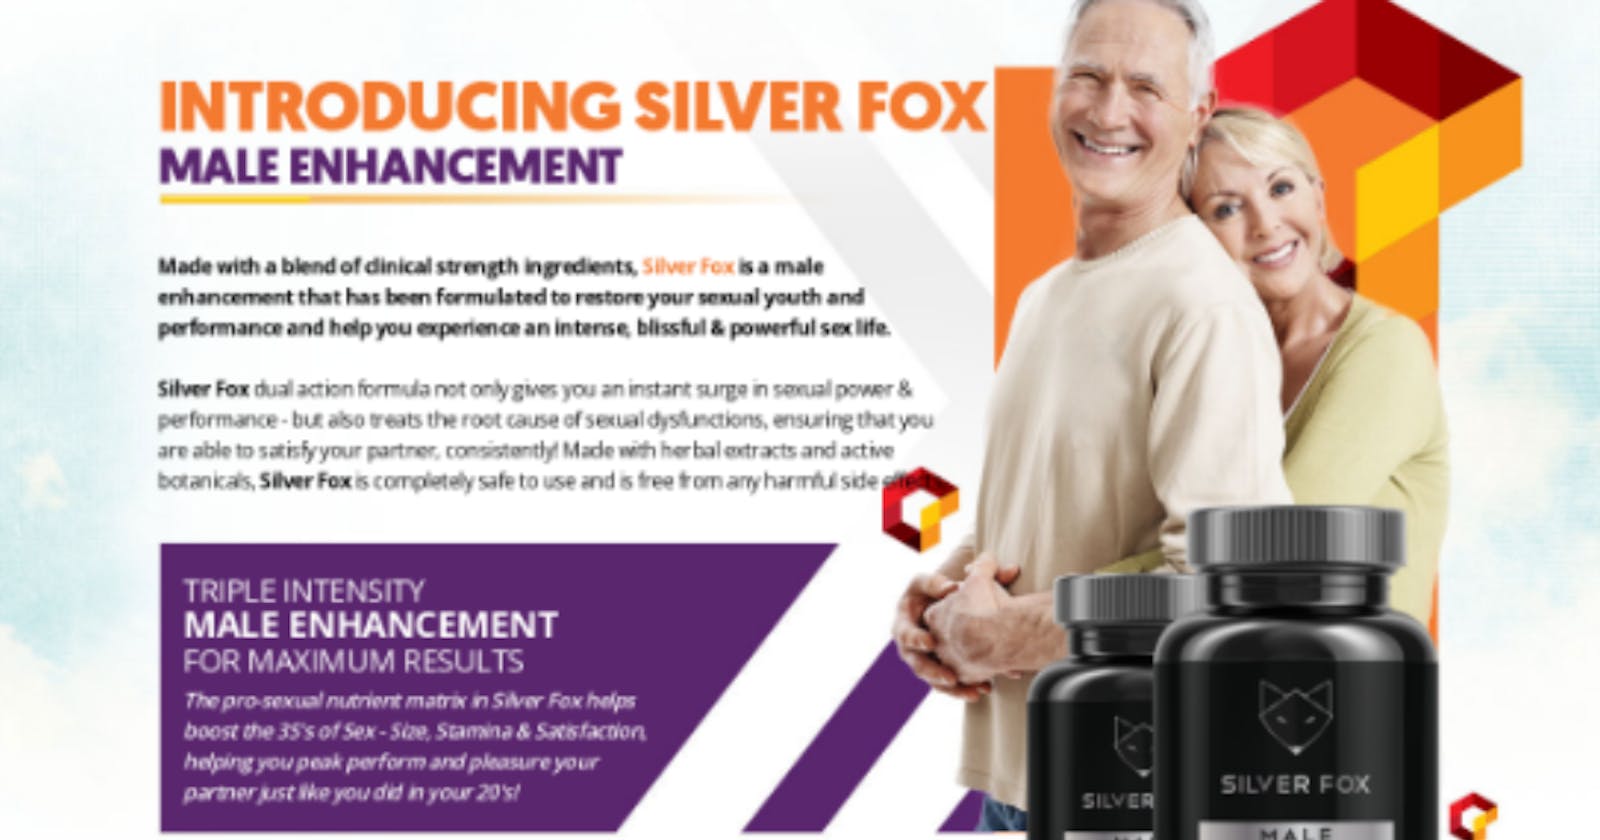 Silver Fox Male Enhancement Reviews (Scam or Legit) – Pros, Cons, Side effects and How It works Shocking Scam Controversy or Effective?